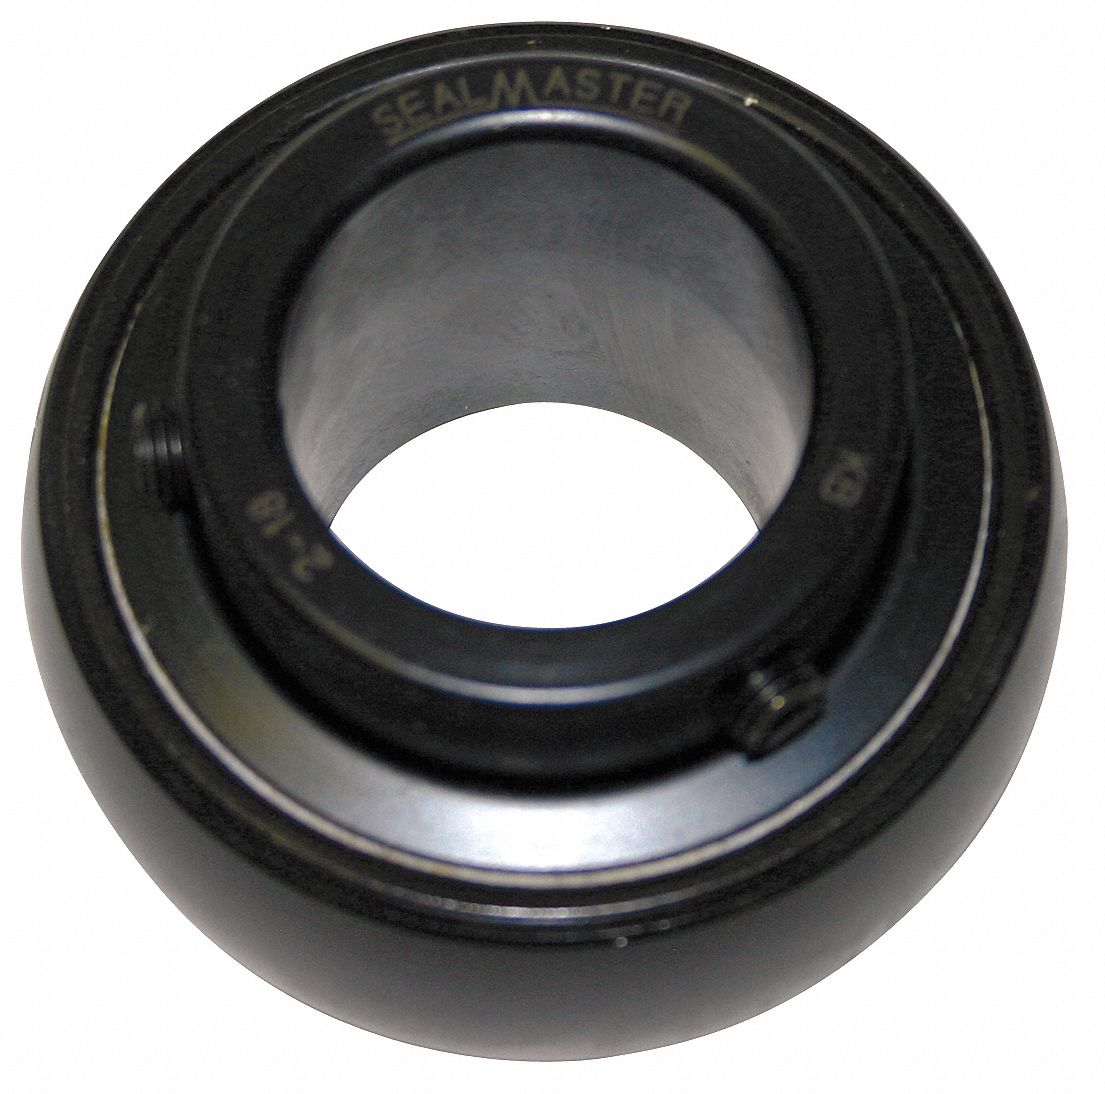 Details about   Sealmaster bearing S-A-8-13 New Old Stock